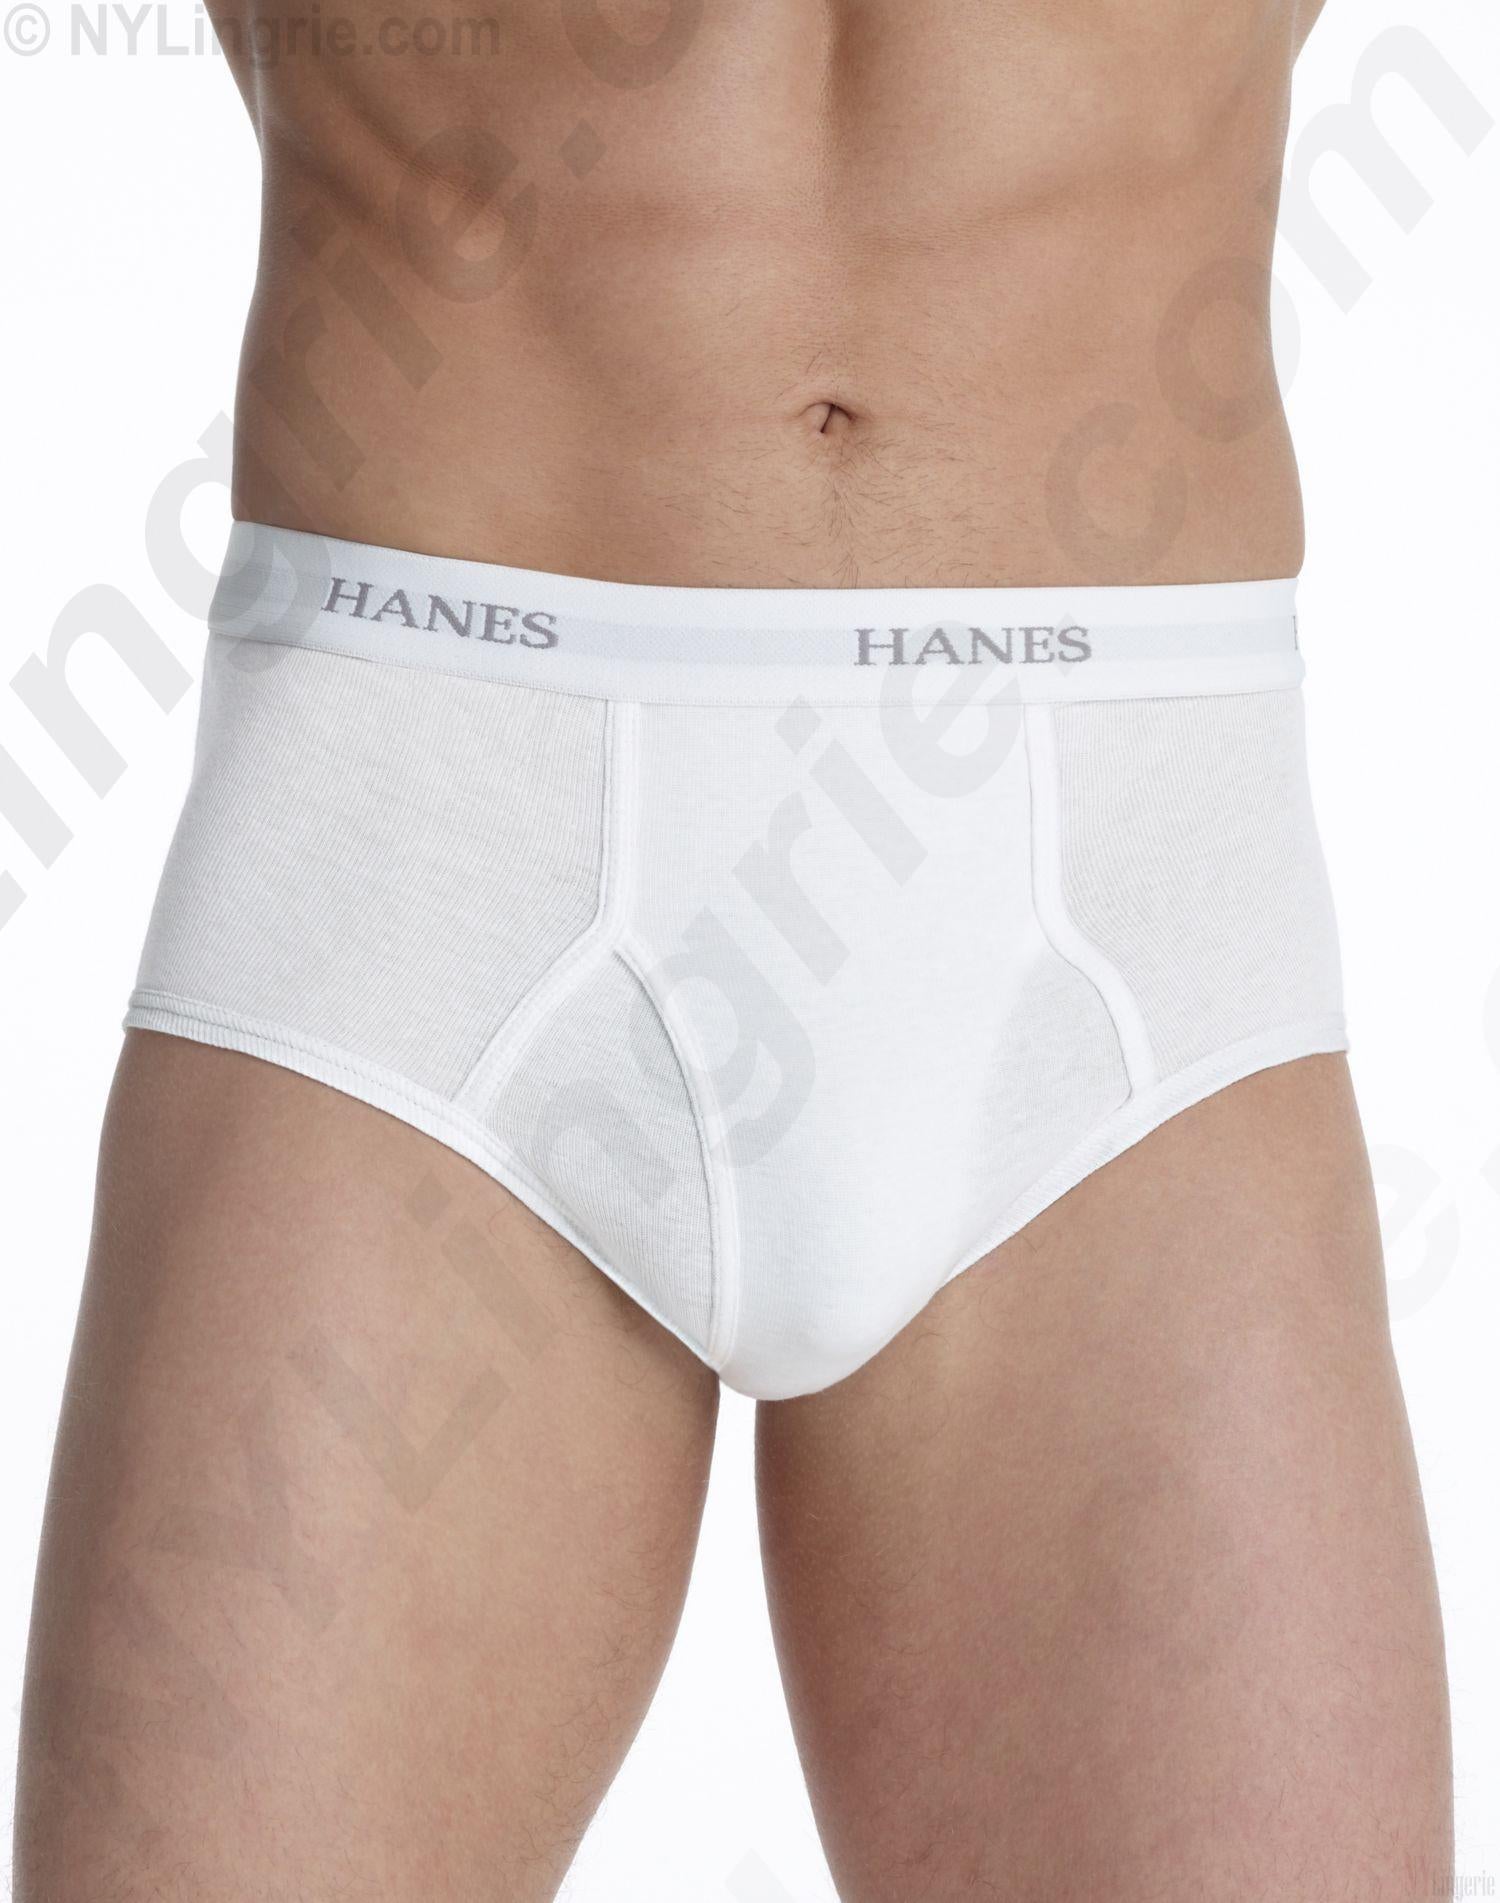 Hanes Classics Men's Full Cut Brief 3 Pack Pair Sz 40 Style 7760 Tighty  Whities